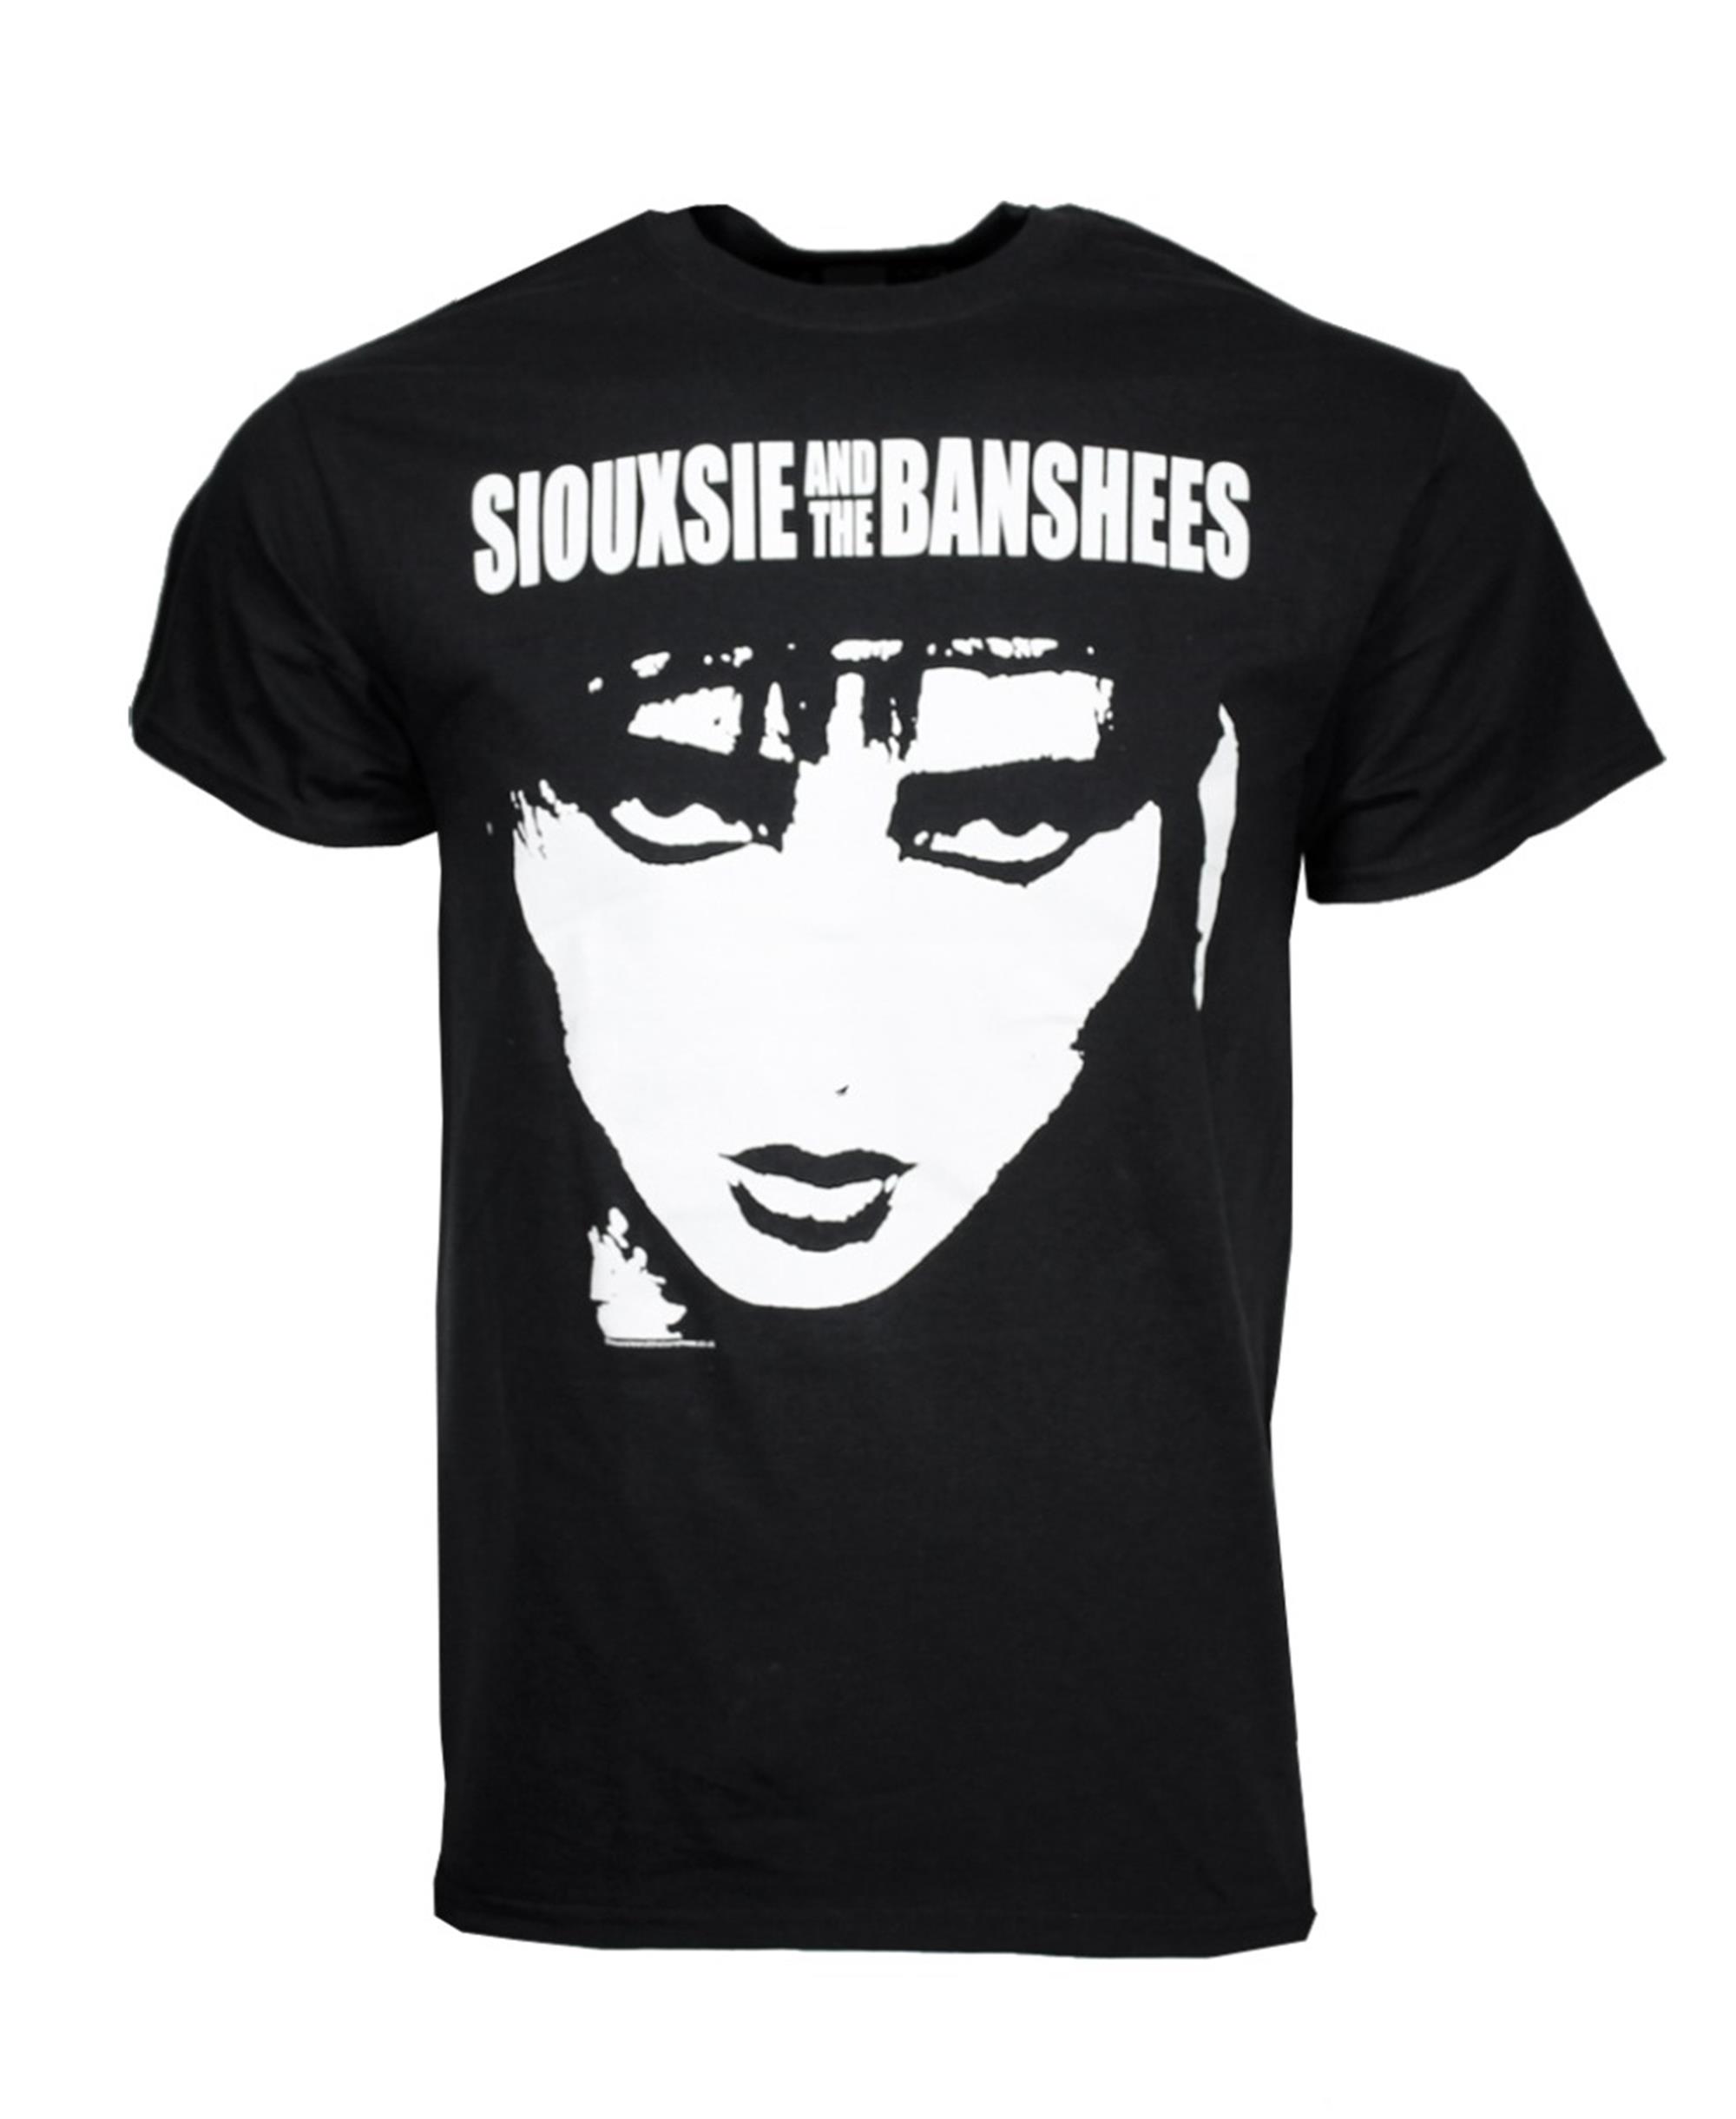 MENS SIOUXSIE AND THE BANSHEES T SHIRT